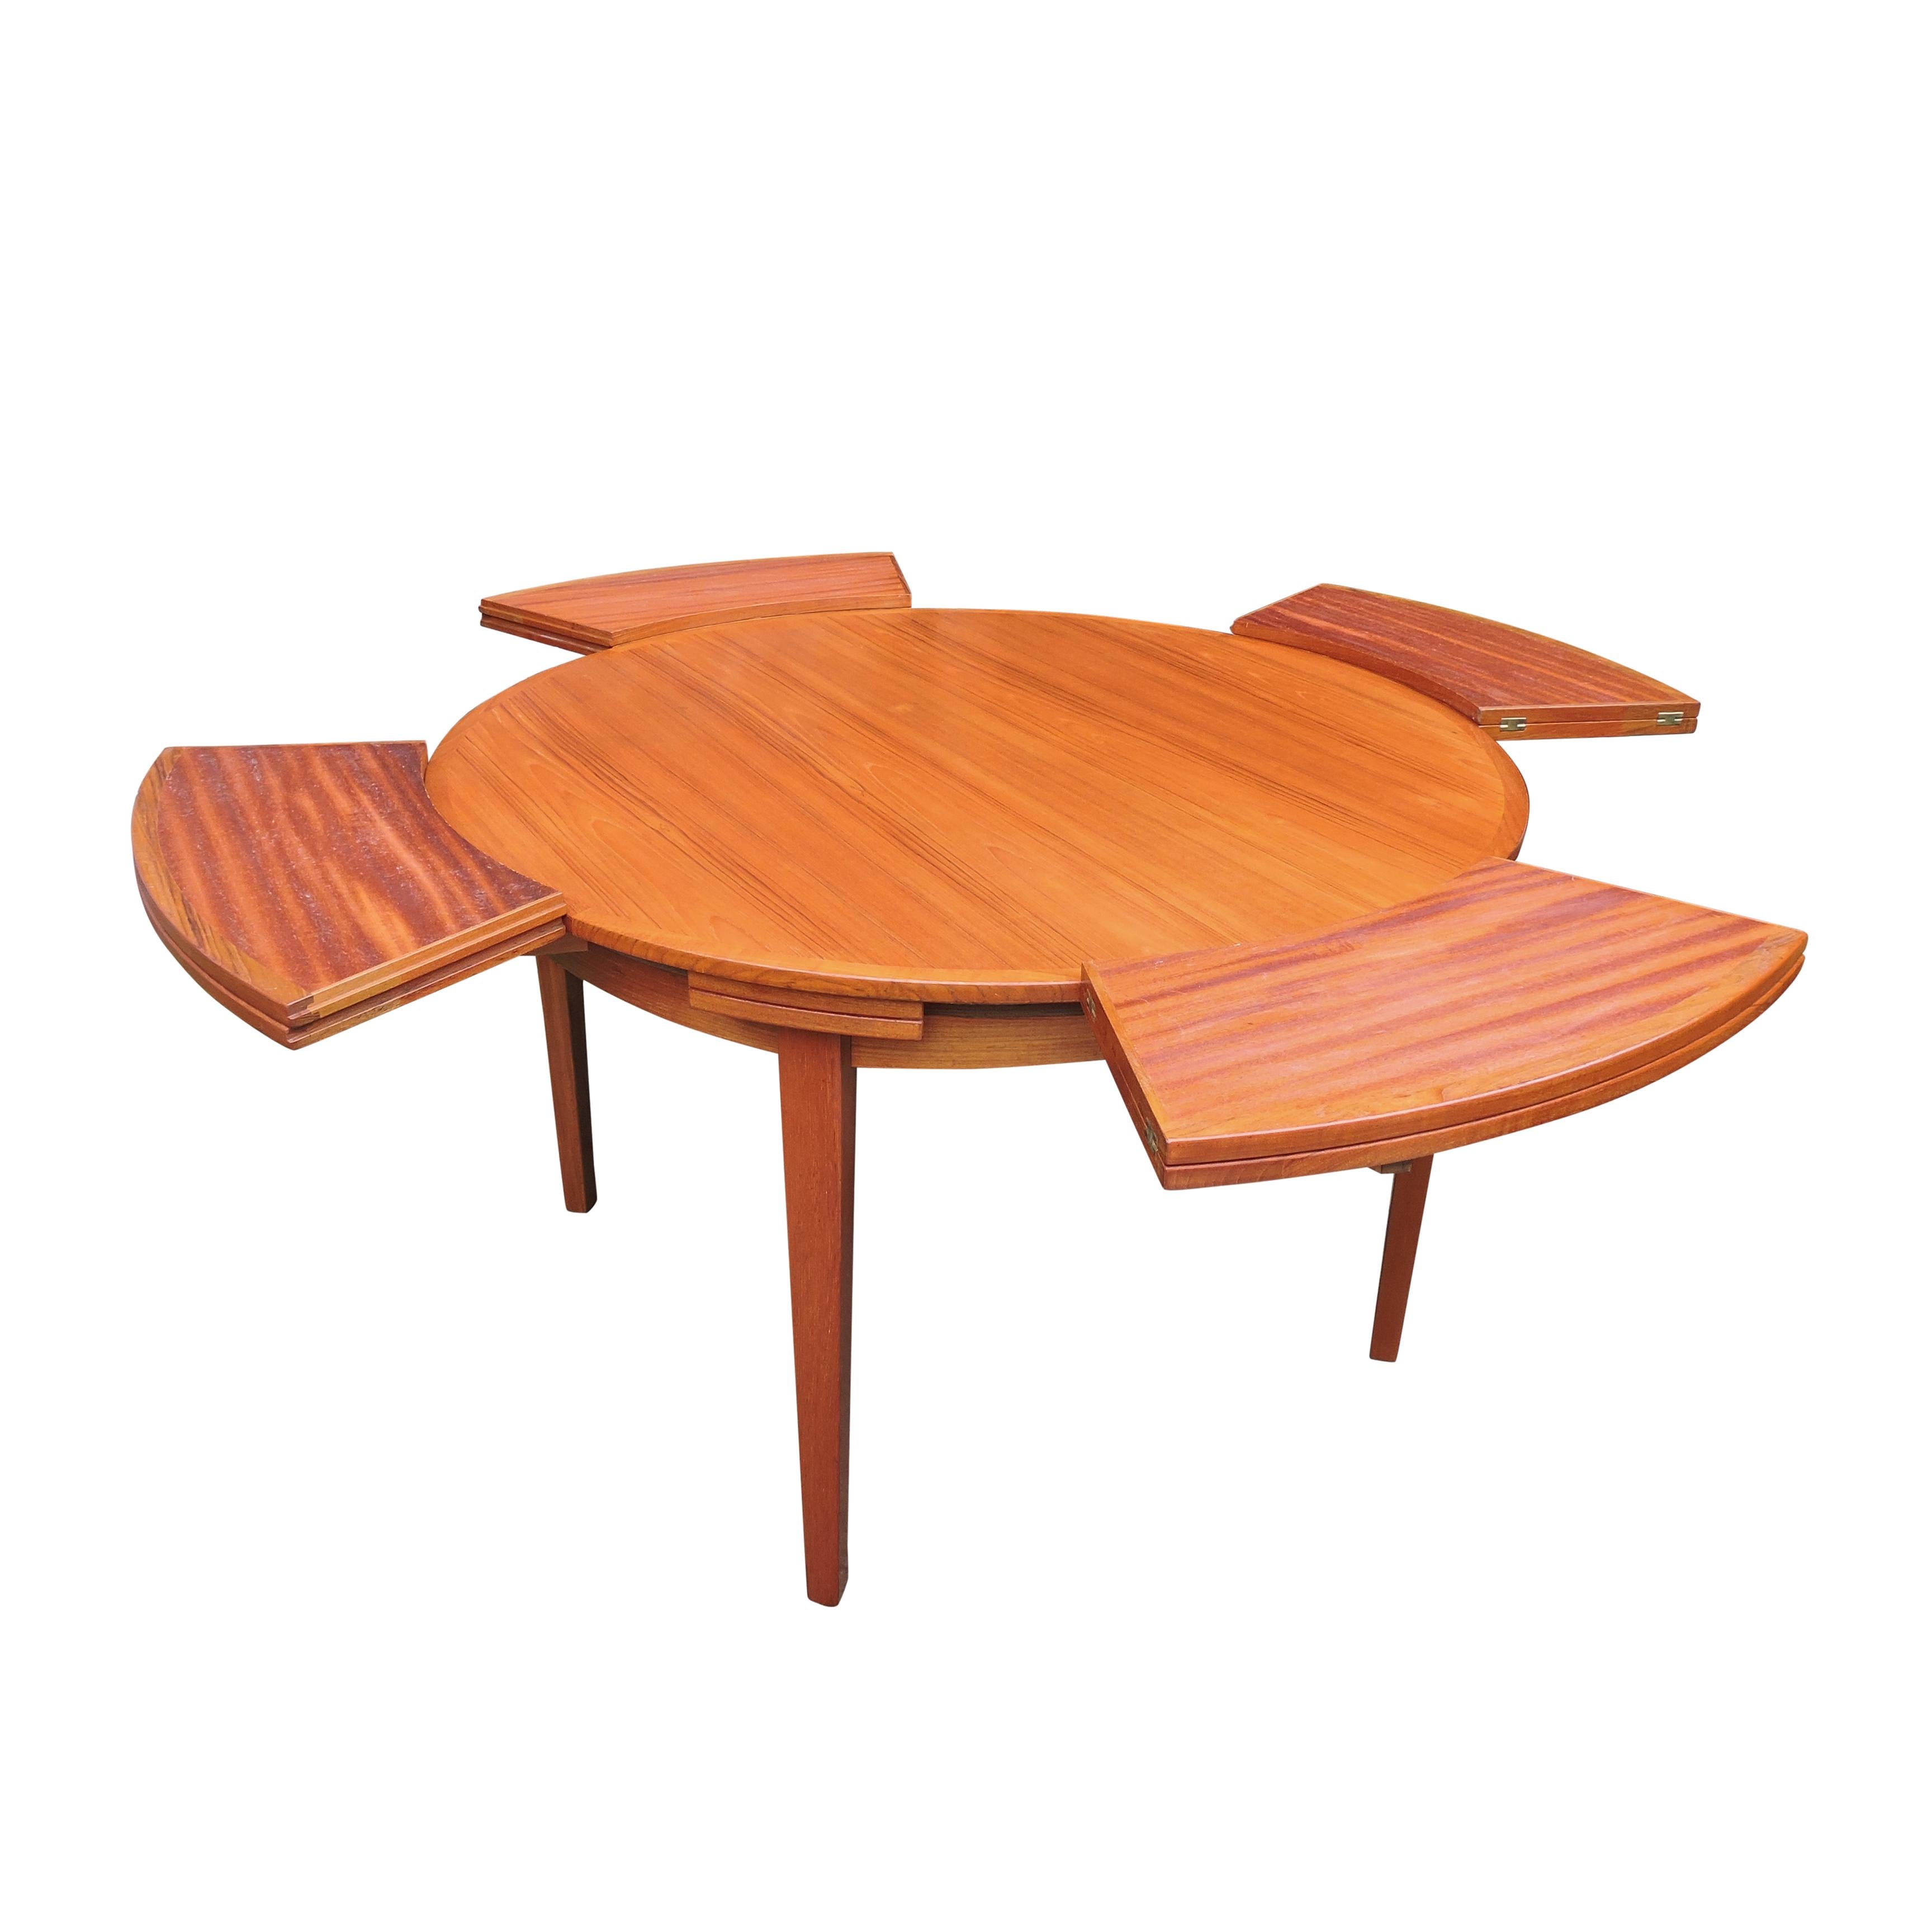 Danish Midcentury Flip-Flap Teak Dining Table from Dyrlund, 1950s For Sale